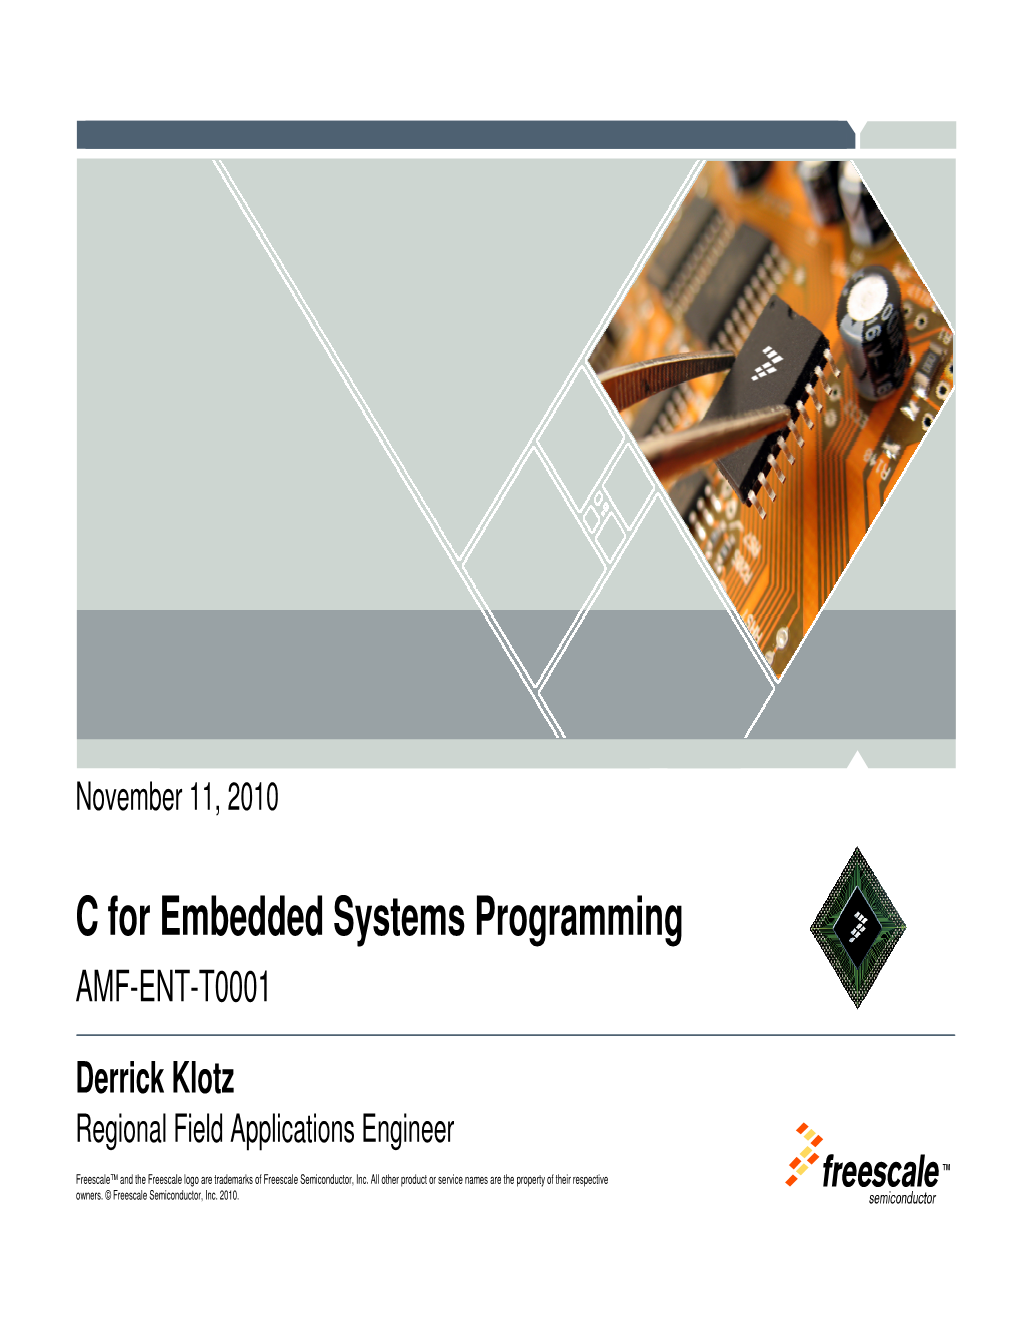 C for Embedded Systems Programming AMF-ENT-T0001